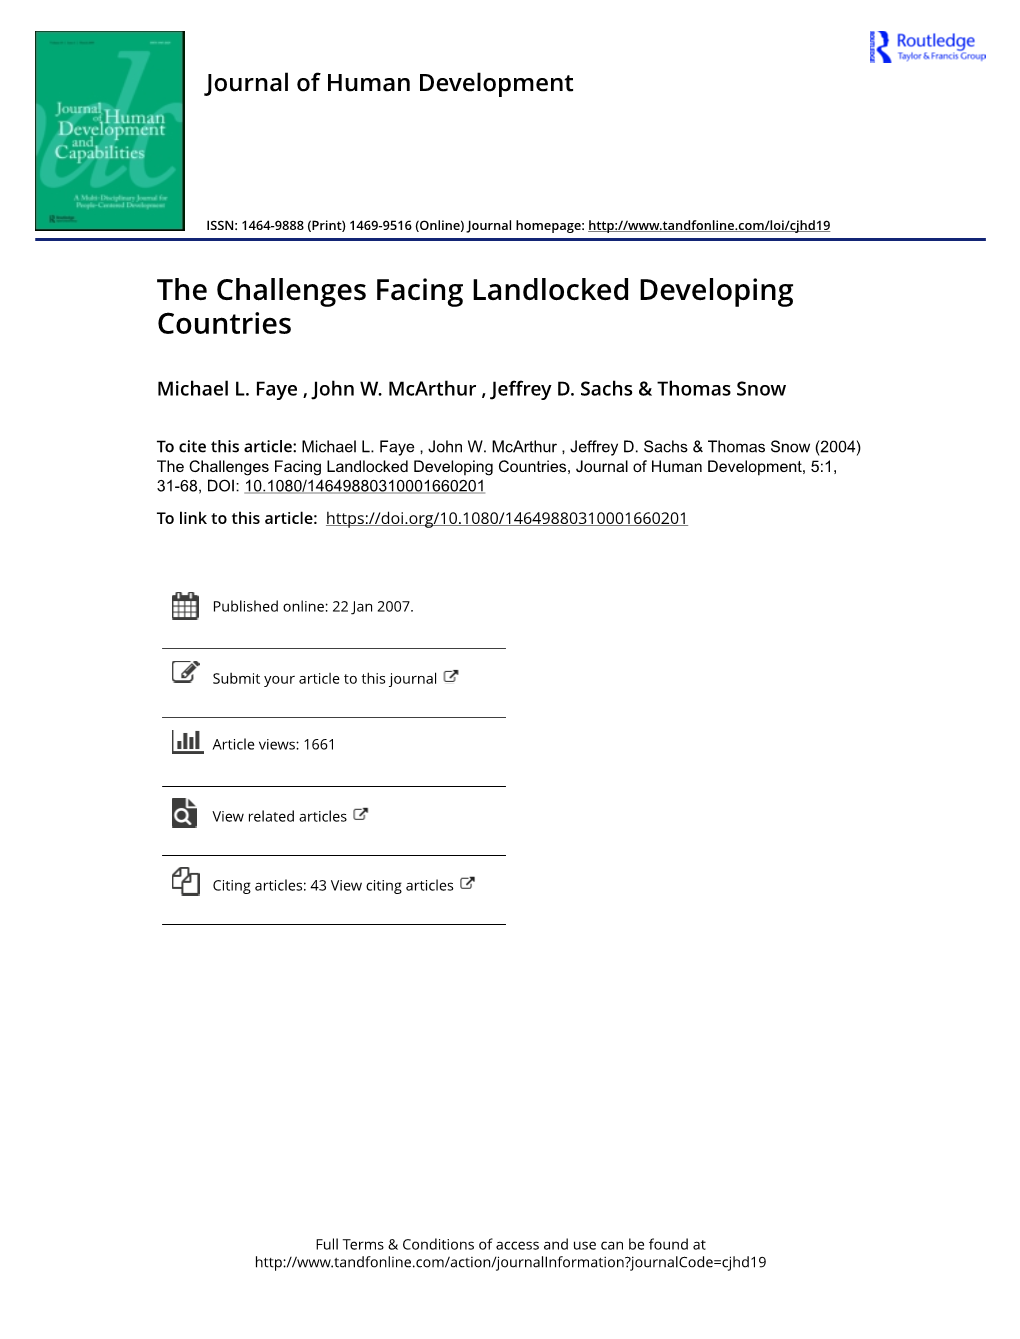 The Challenges Facing Landlocked Developing Countries